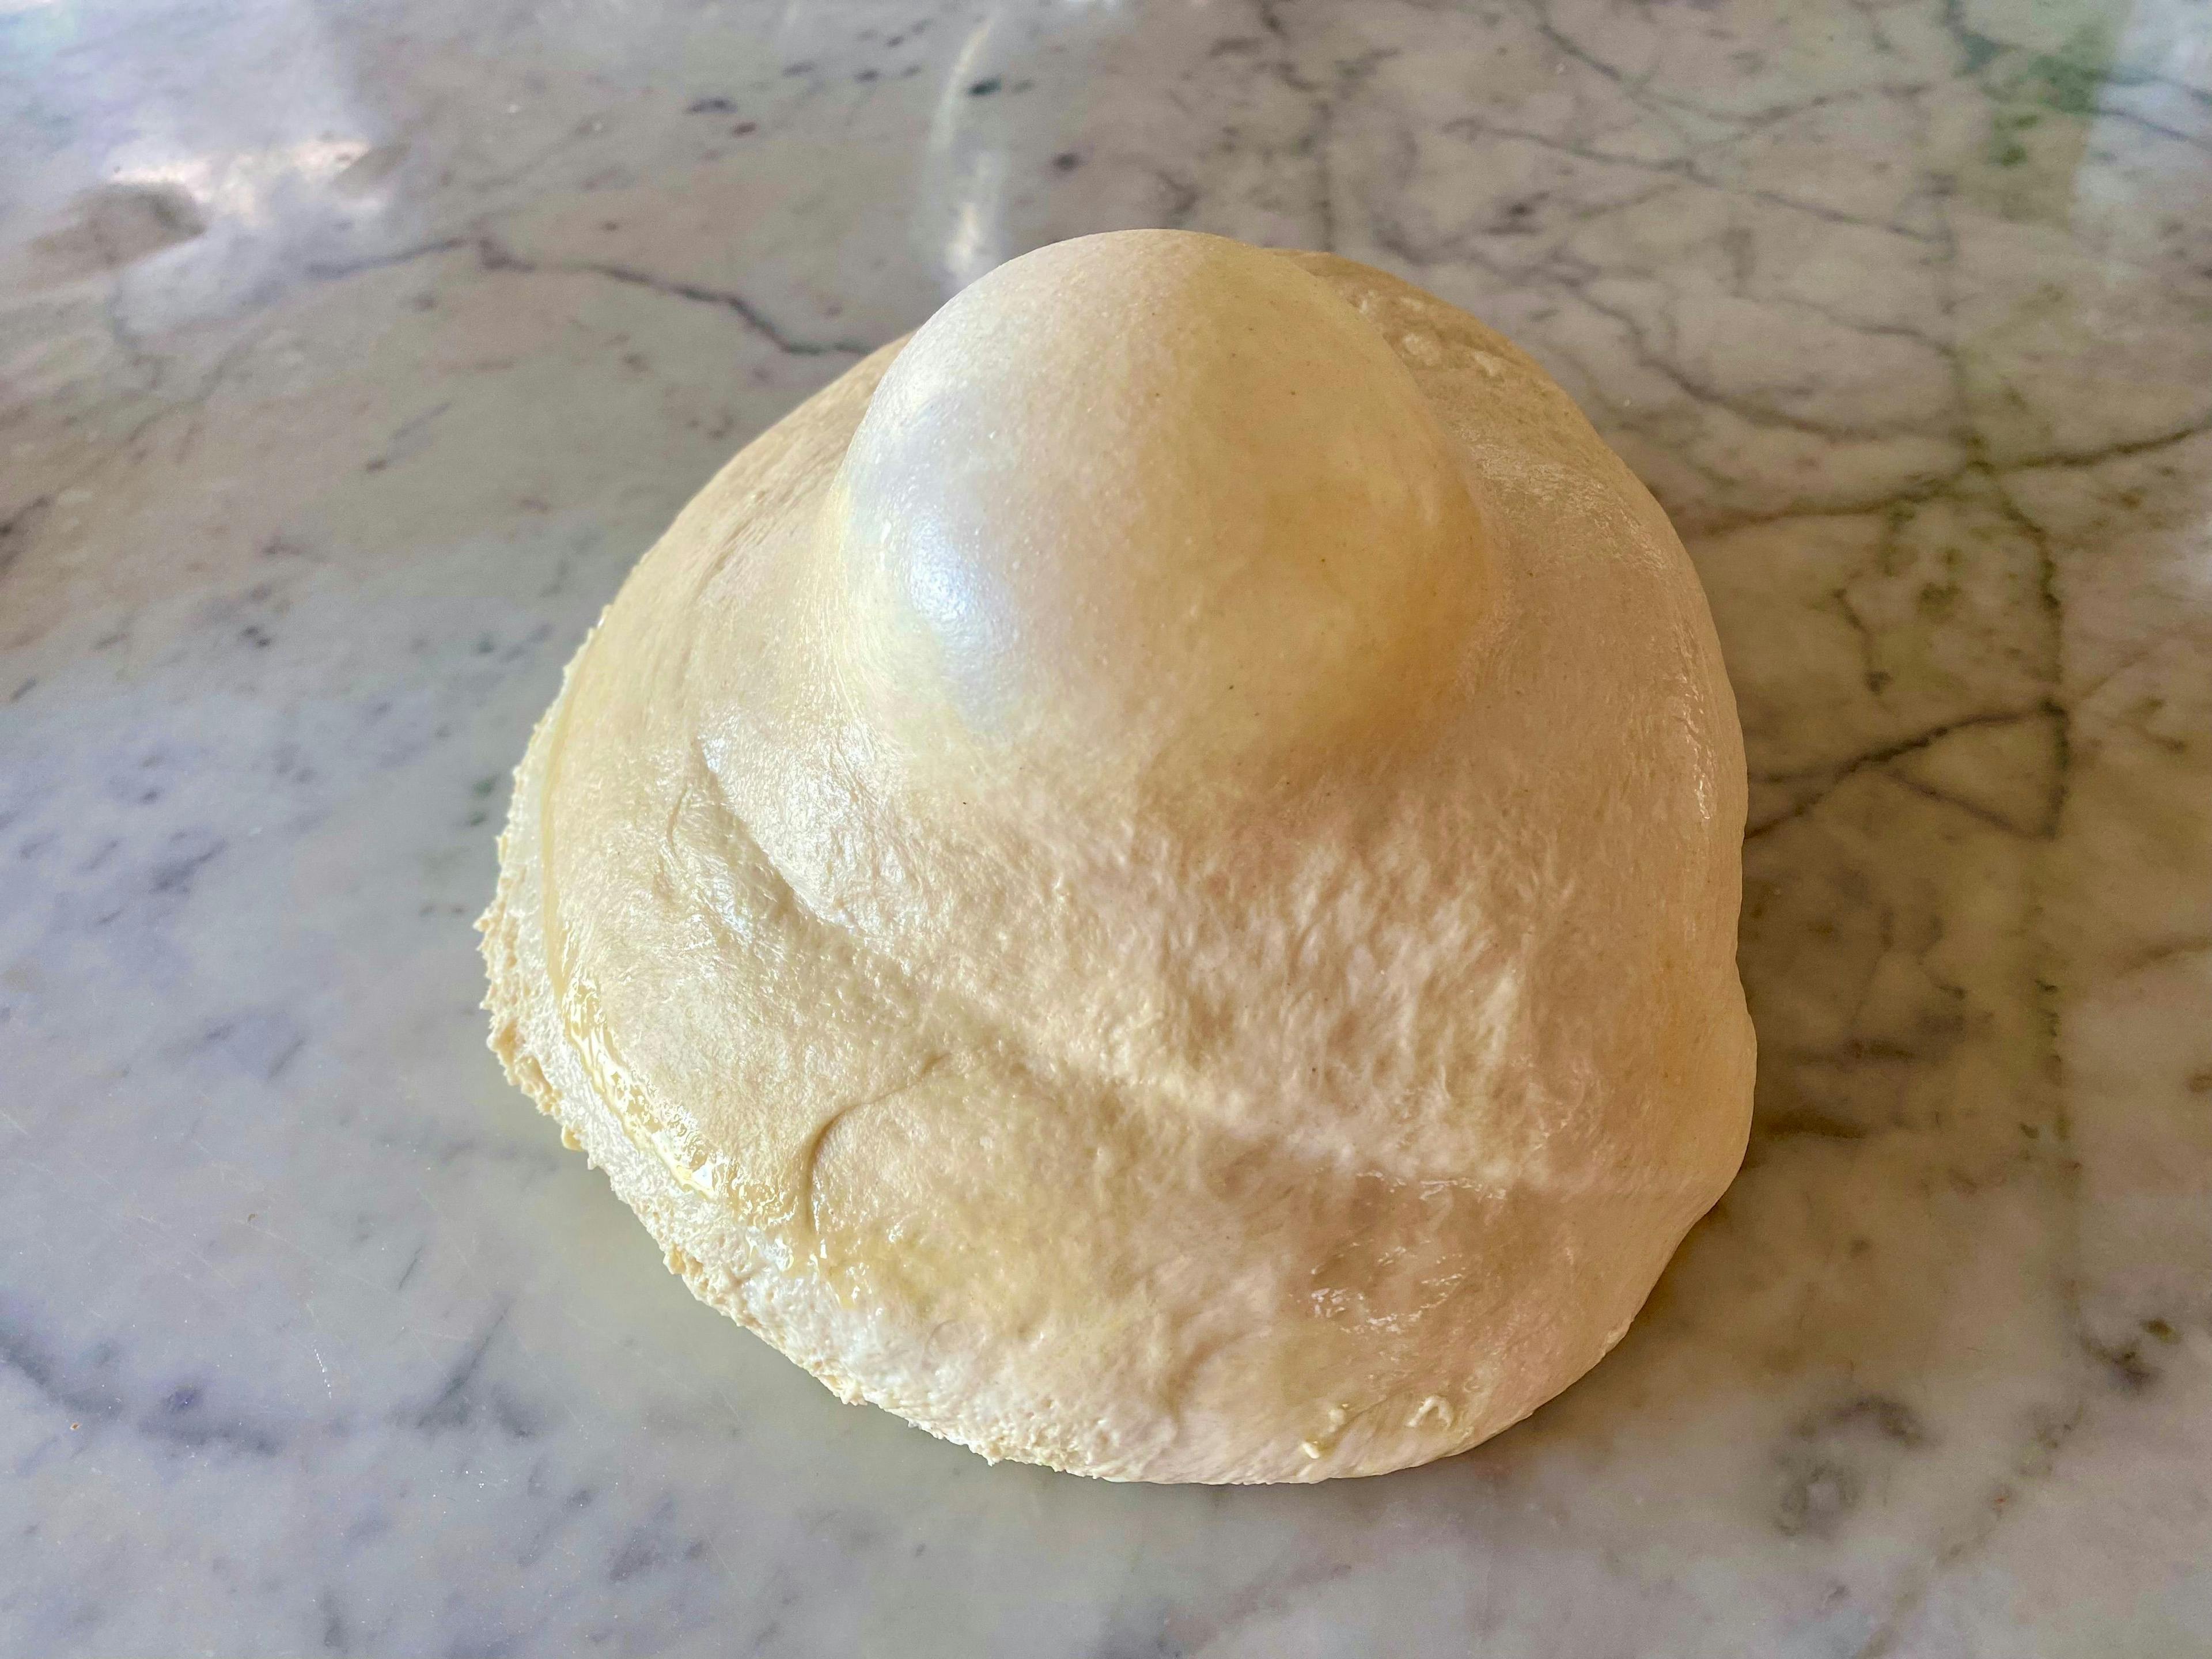 pizza dough with a large air bubble